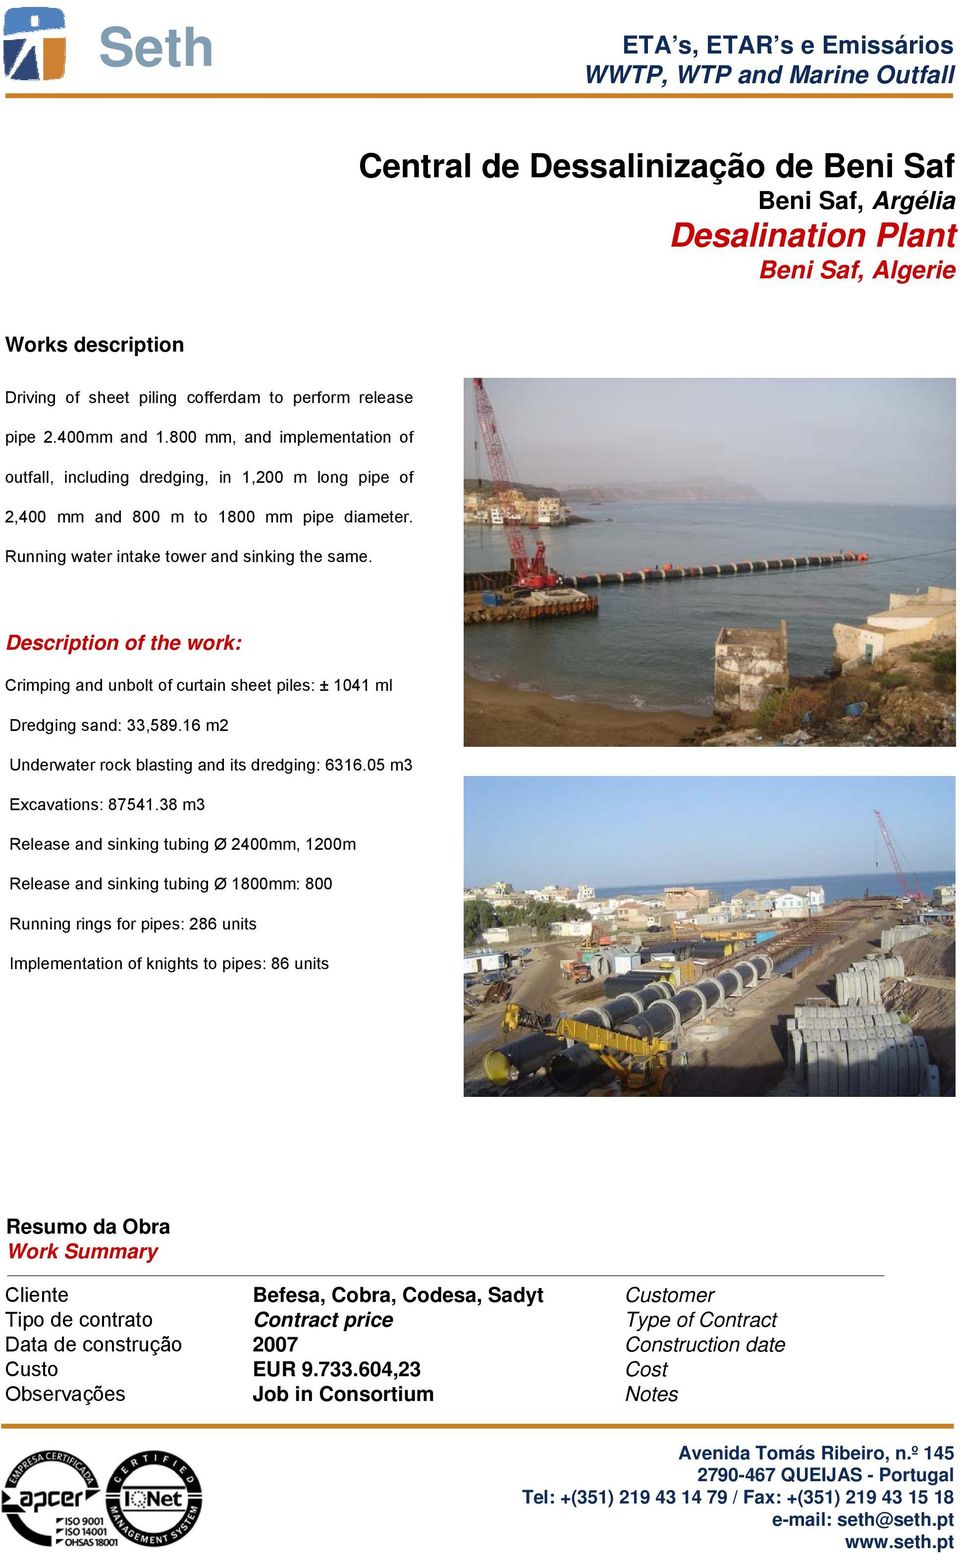 Description of the work: Crimping and unbolt of curtain sheet piles: ± 1041 ml Dredging sand: 33,589.16 m2 Underwater rock blasting and its dredging: 6316.05 m3 Excavations: 87541.